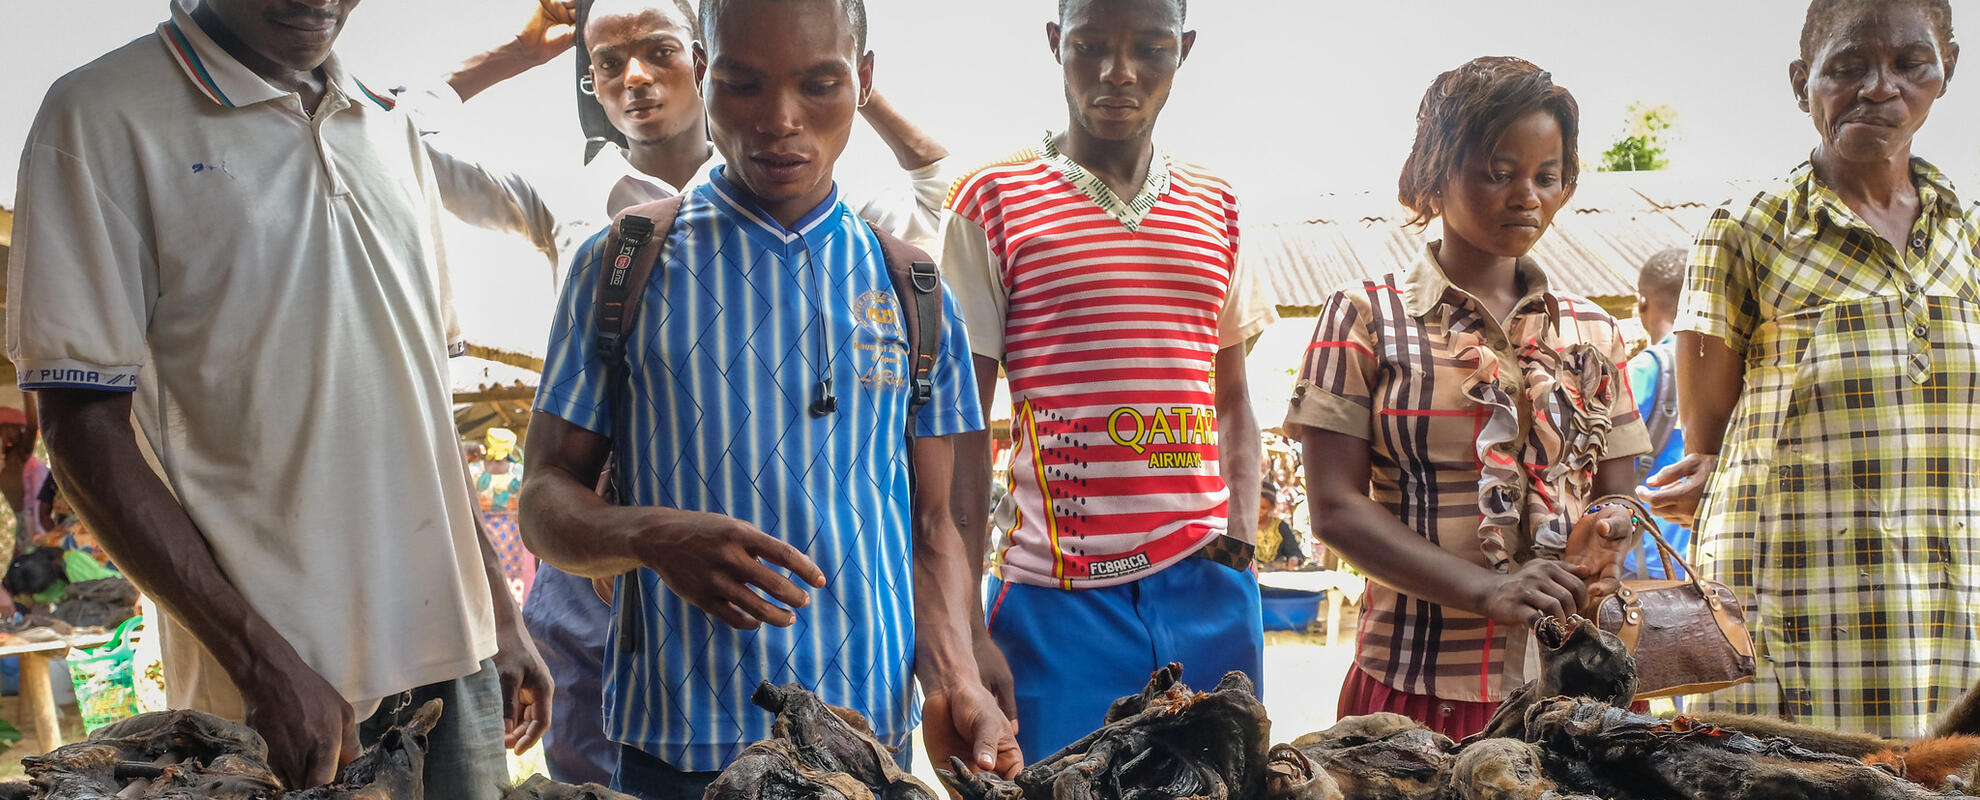 Bushmeat being sold at the weekly market of Yangambi, DRC. Photo credit: Axel Fassio/CIFOR